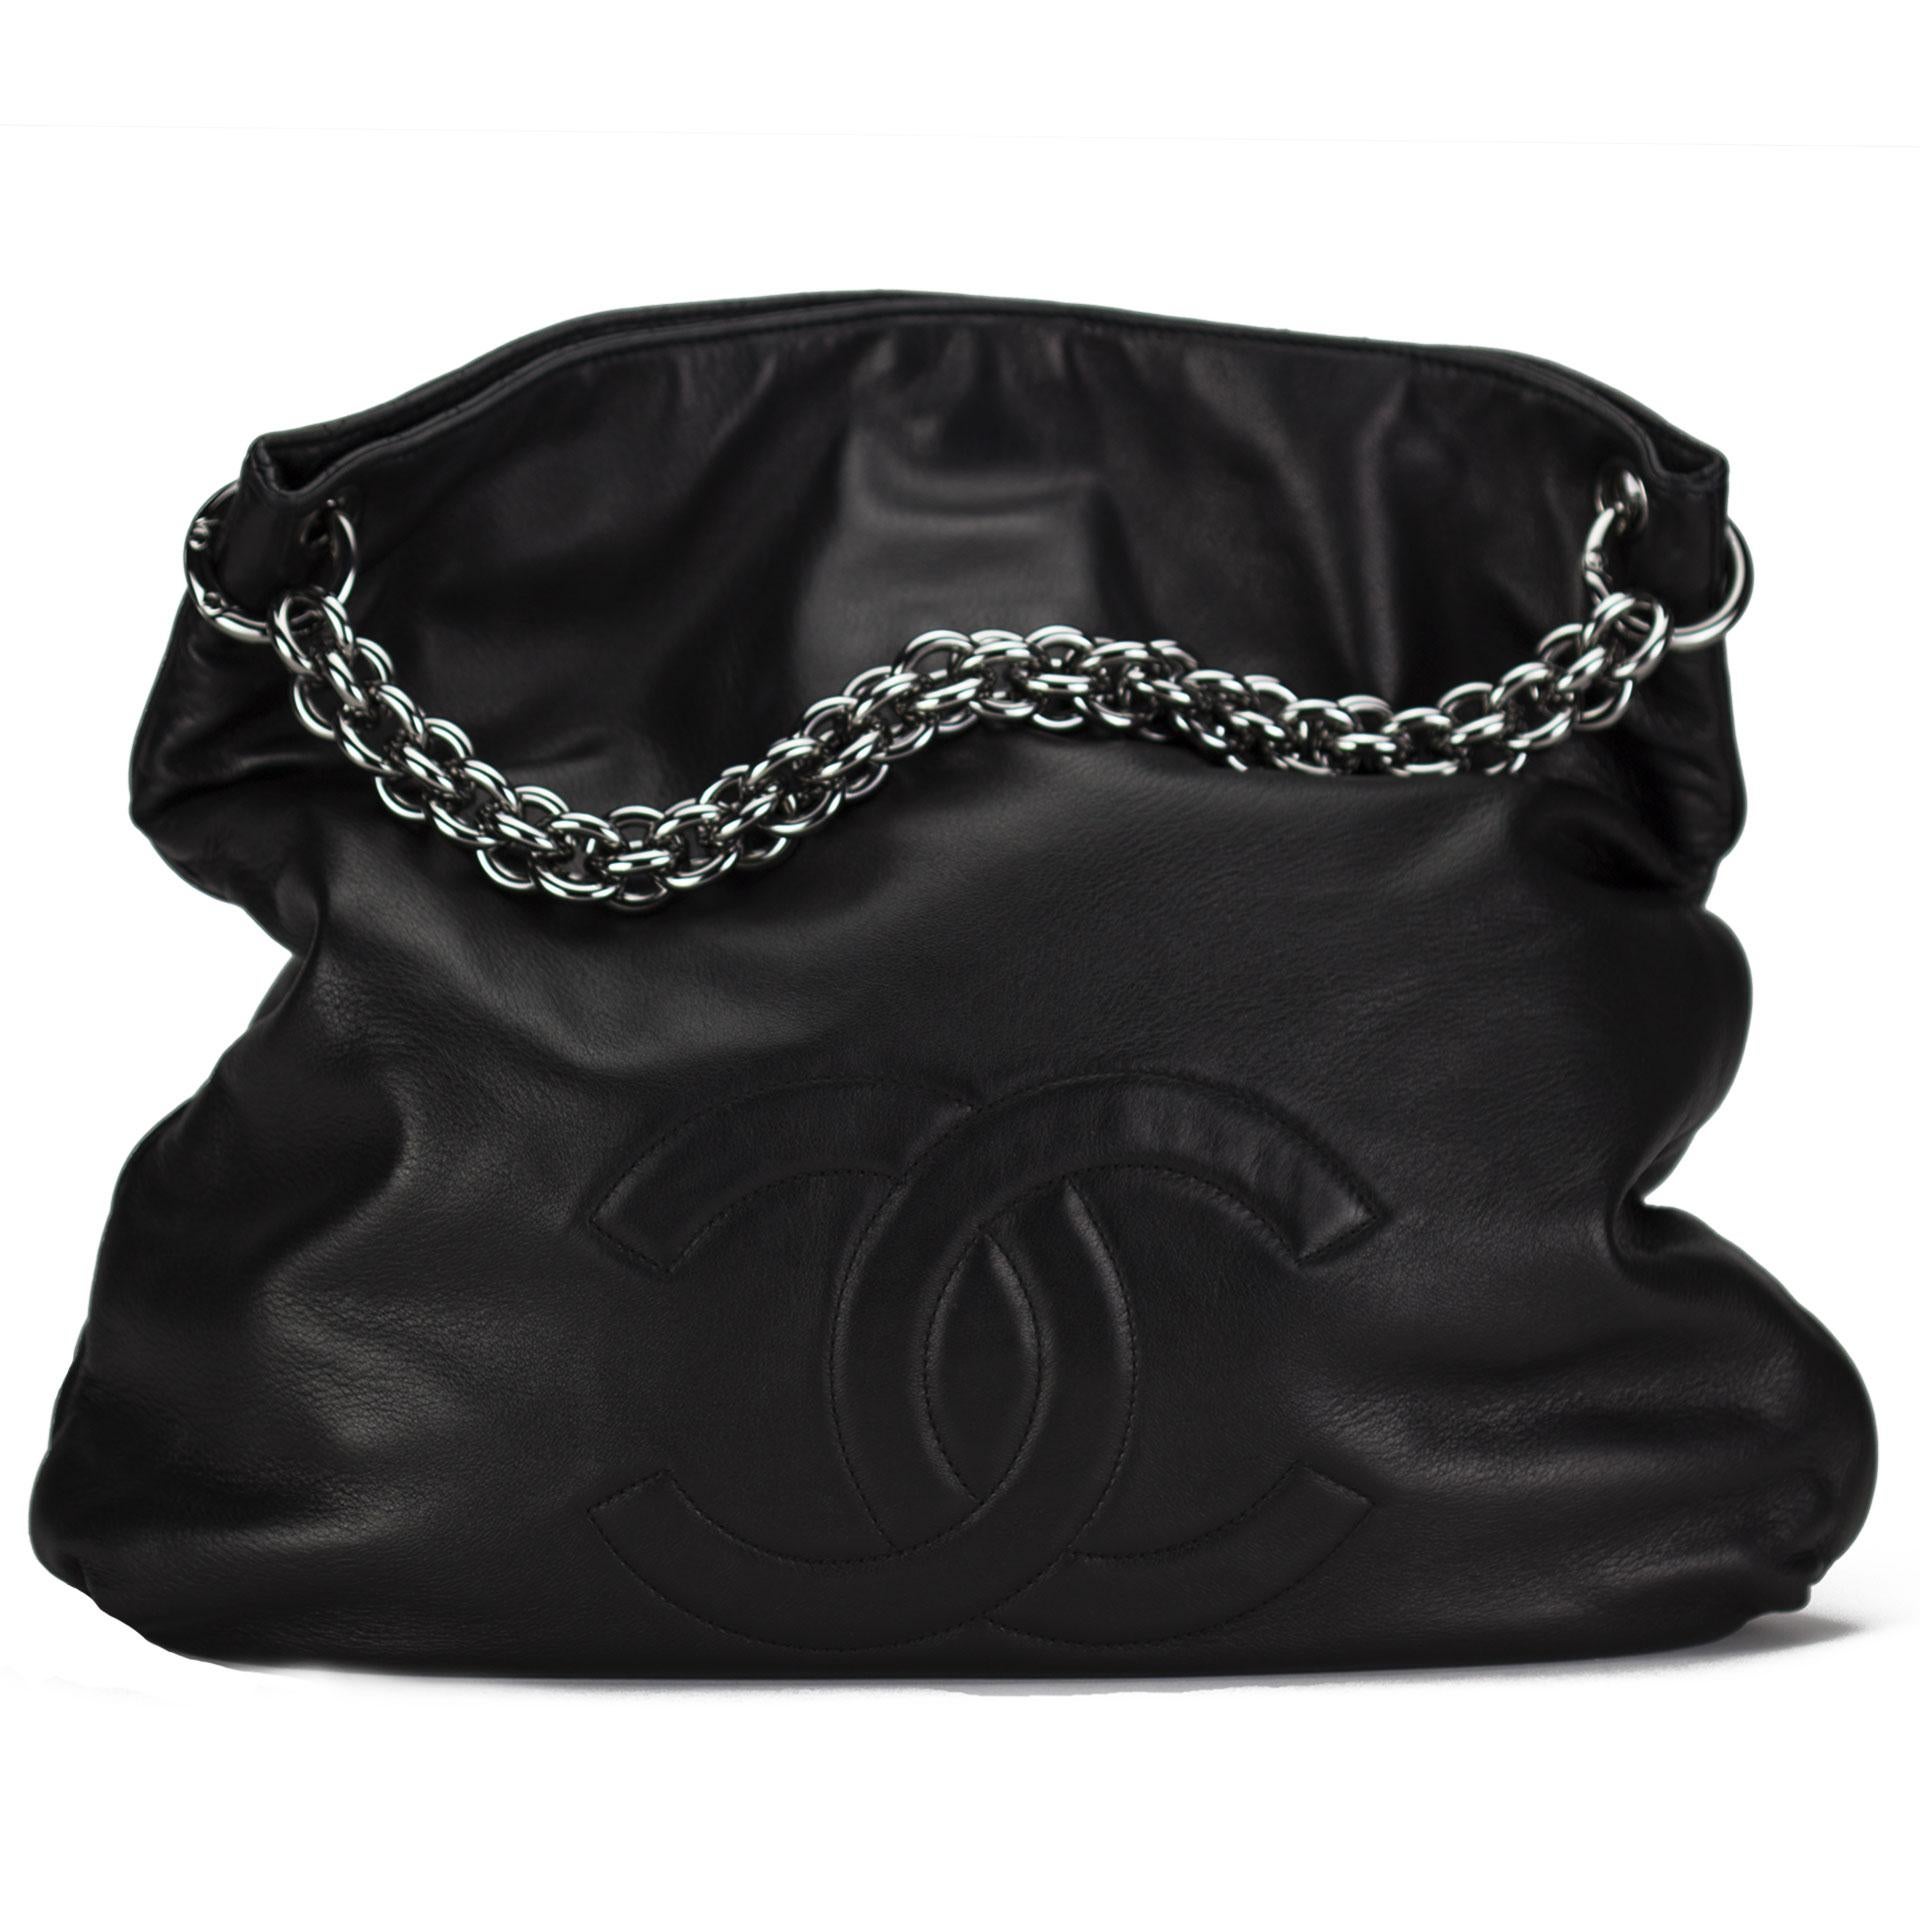 Chanel Large Thick Chain Lambskin Leather Shoulder Bag Tote VIntage 1